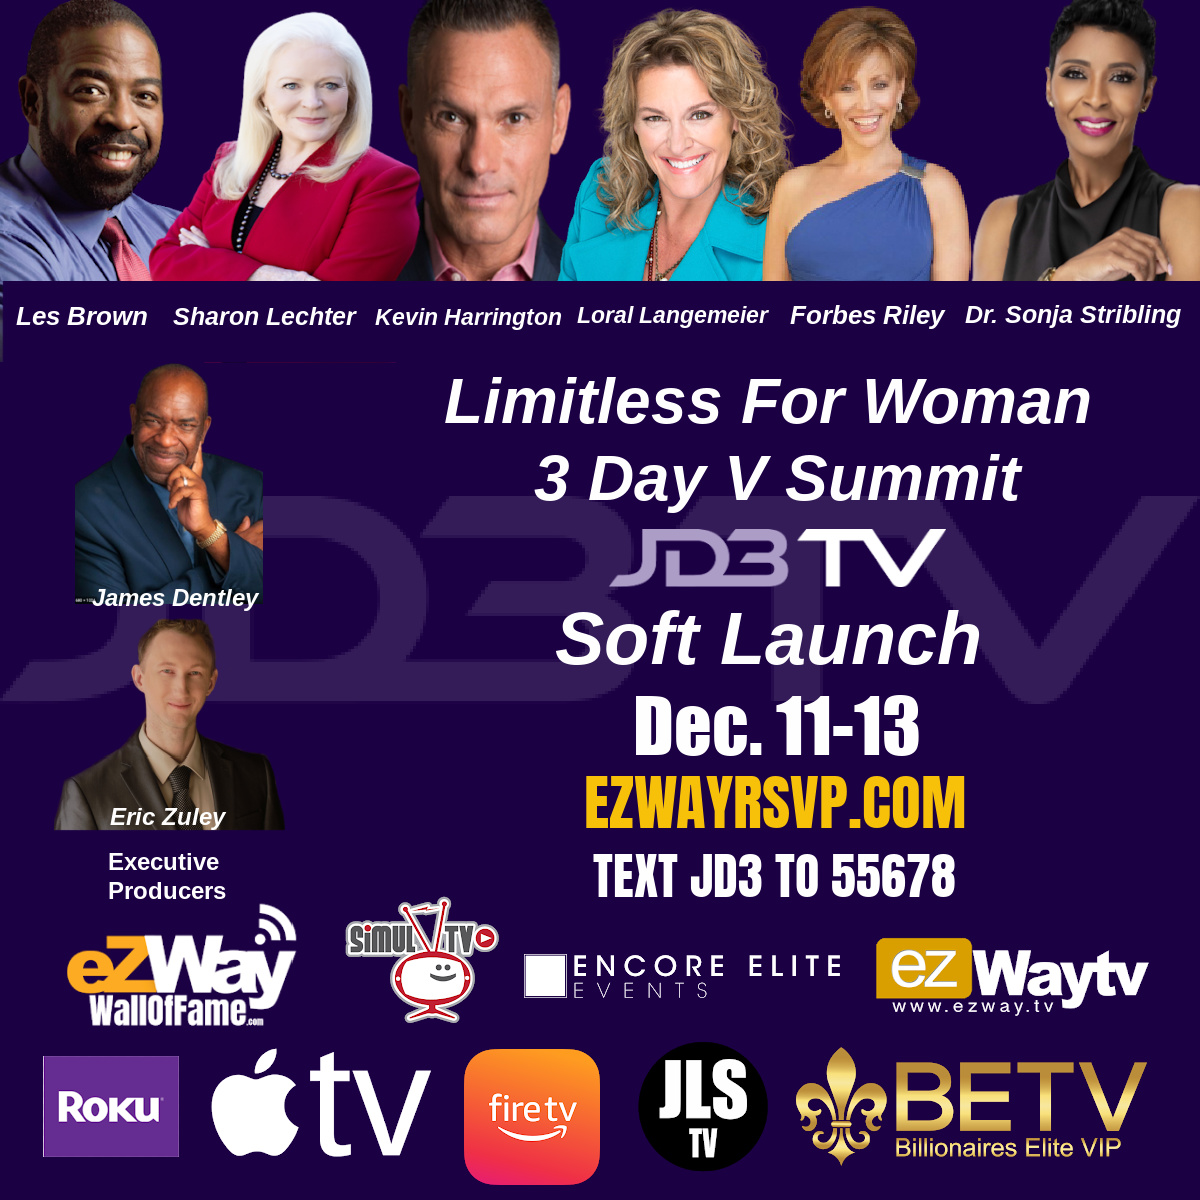 Limitless For Women 3 Days Summit Soft Launch of JD3TV